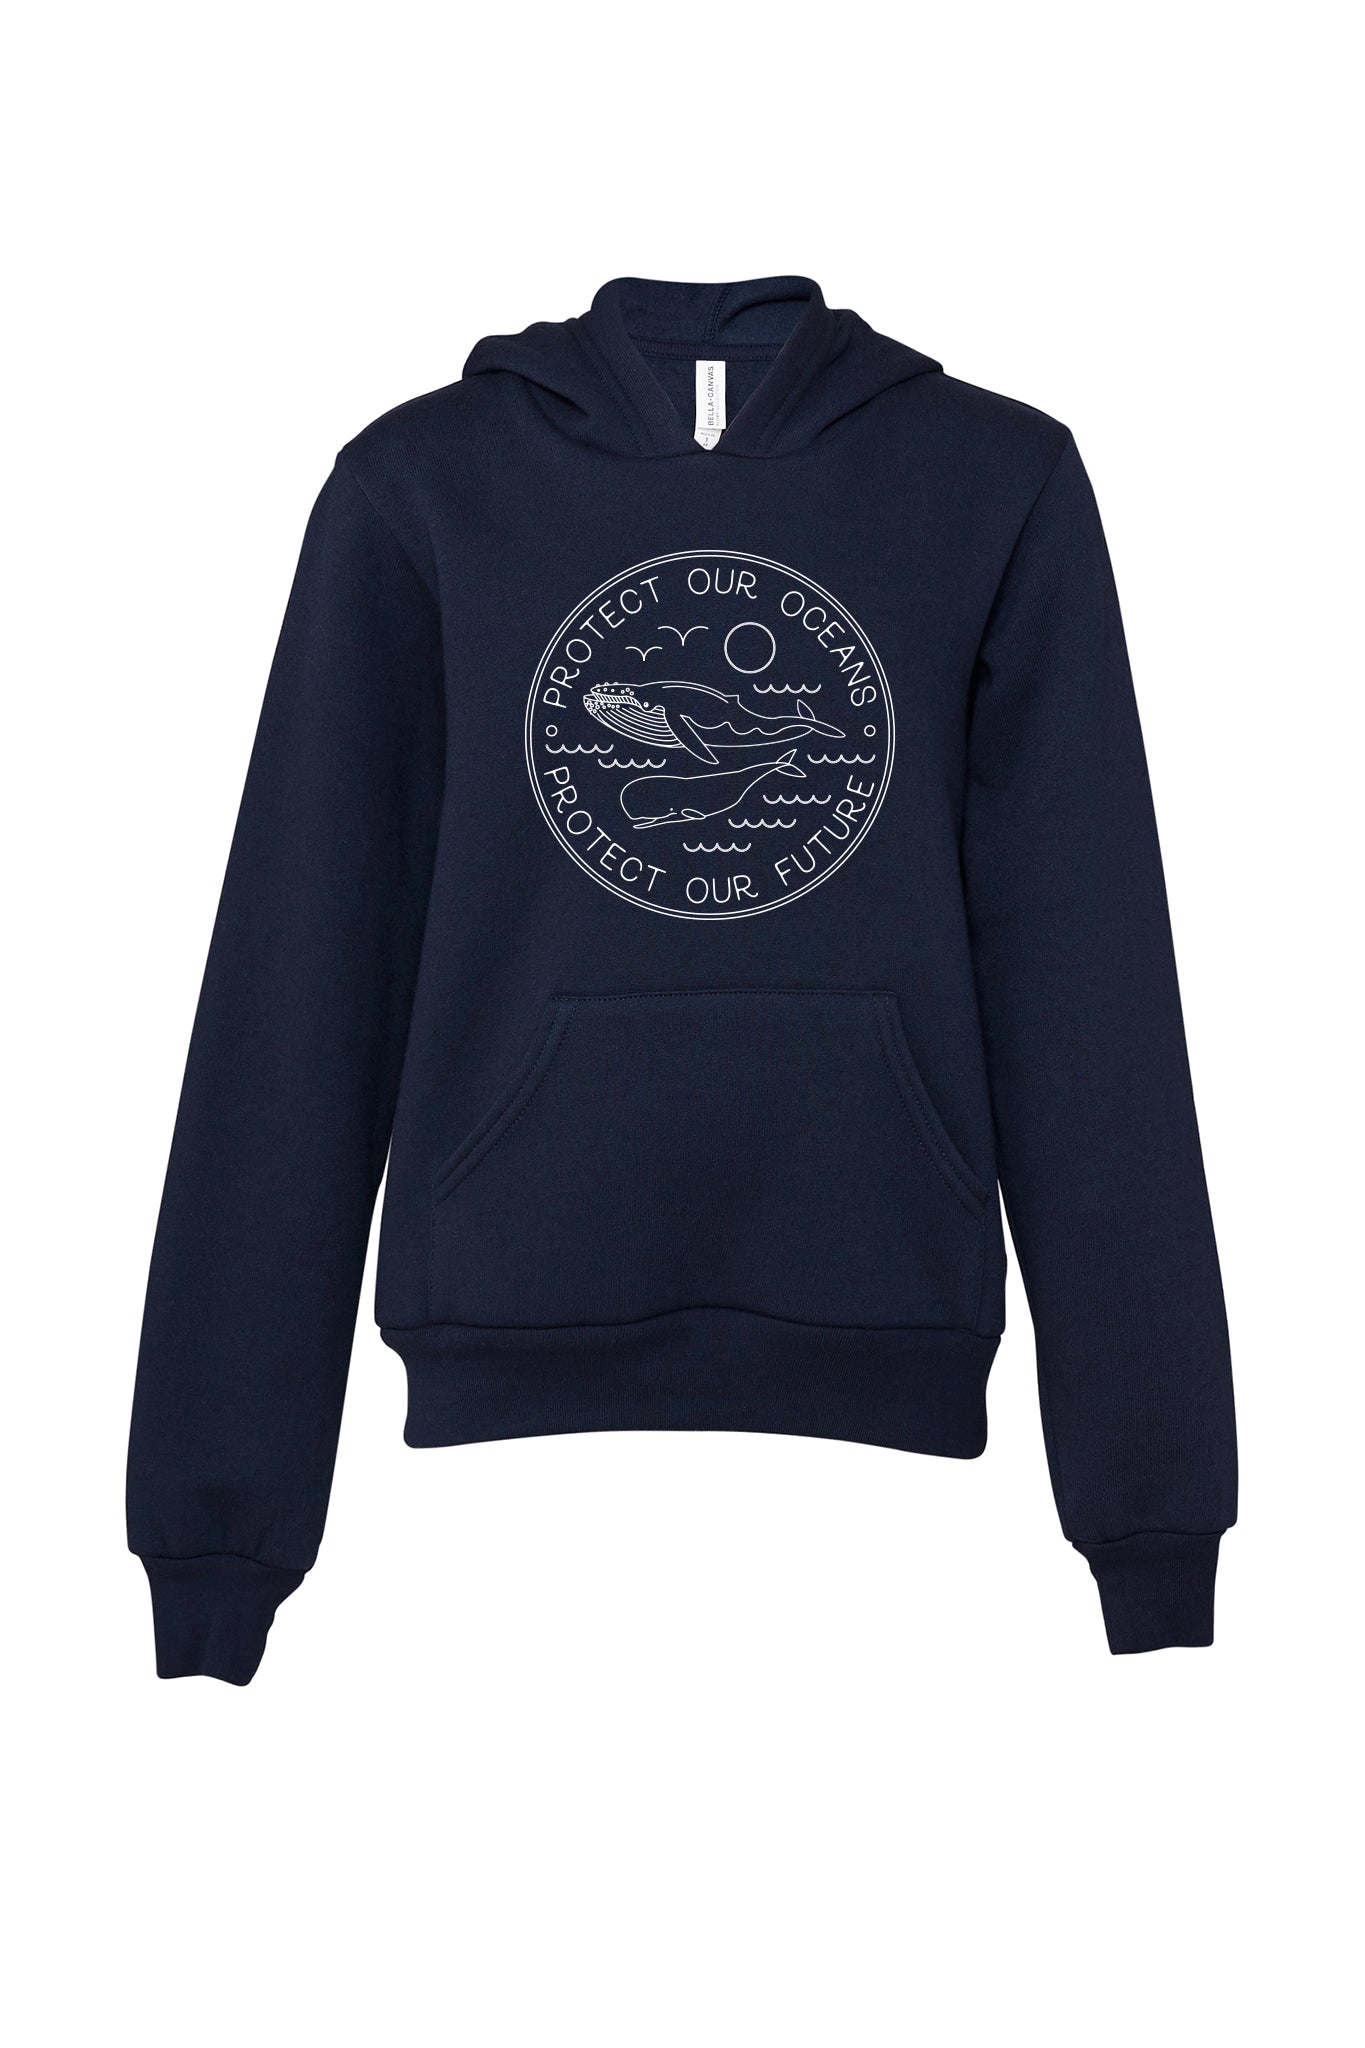 Protect Our Ocean Protect Our Future Hoodie - HoMade Studio